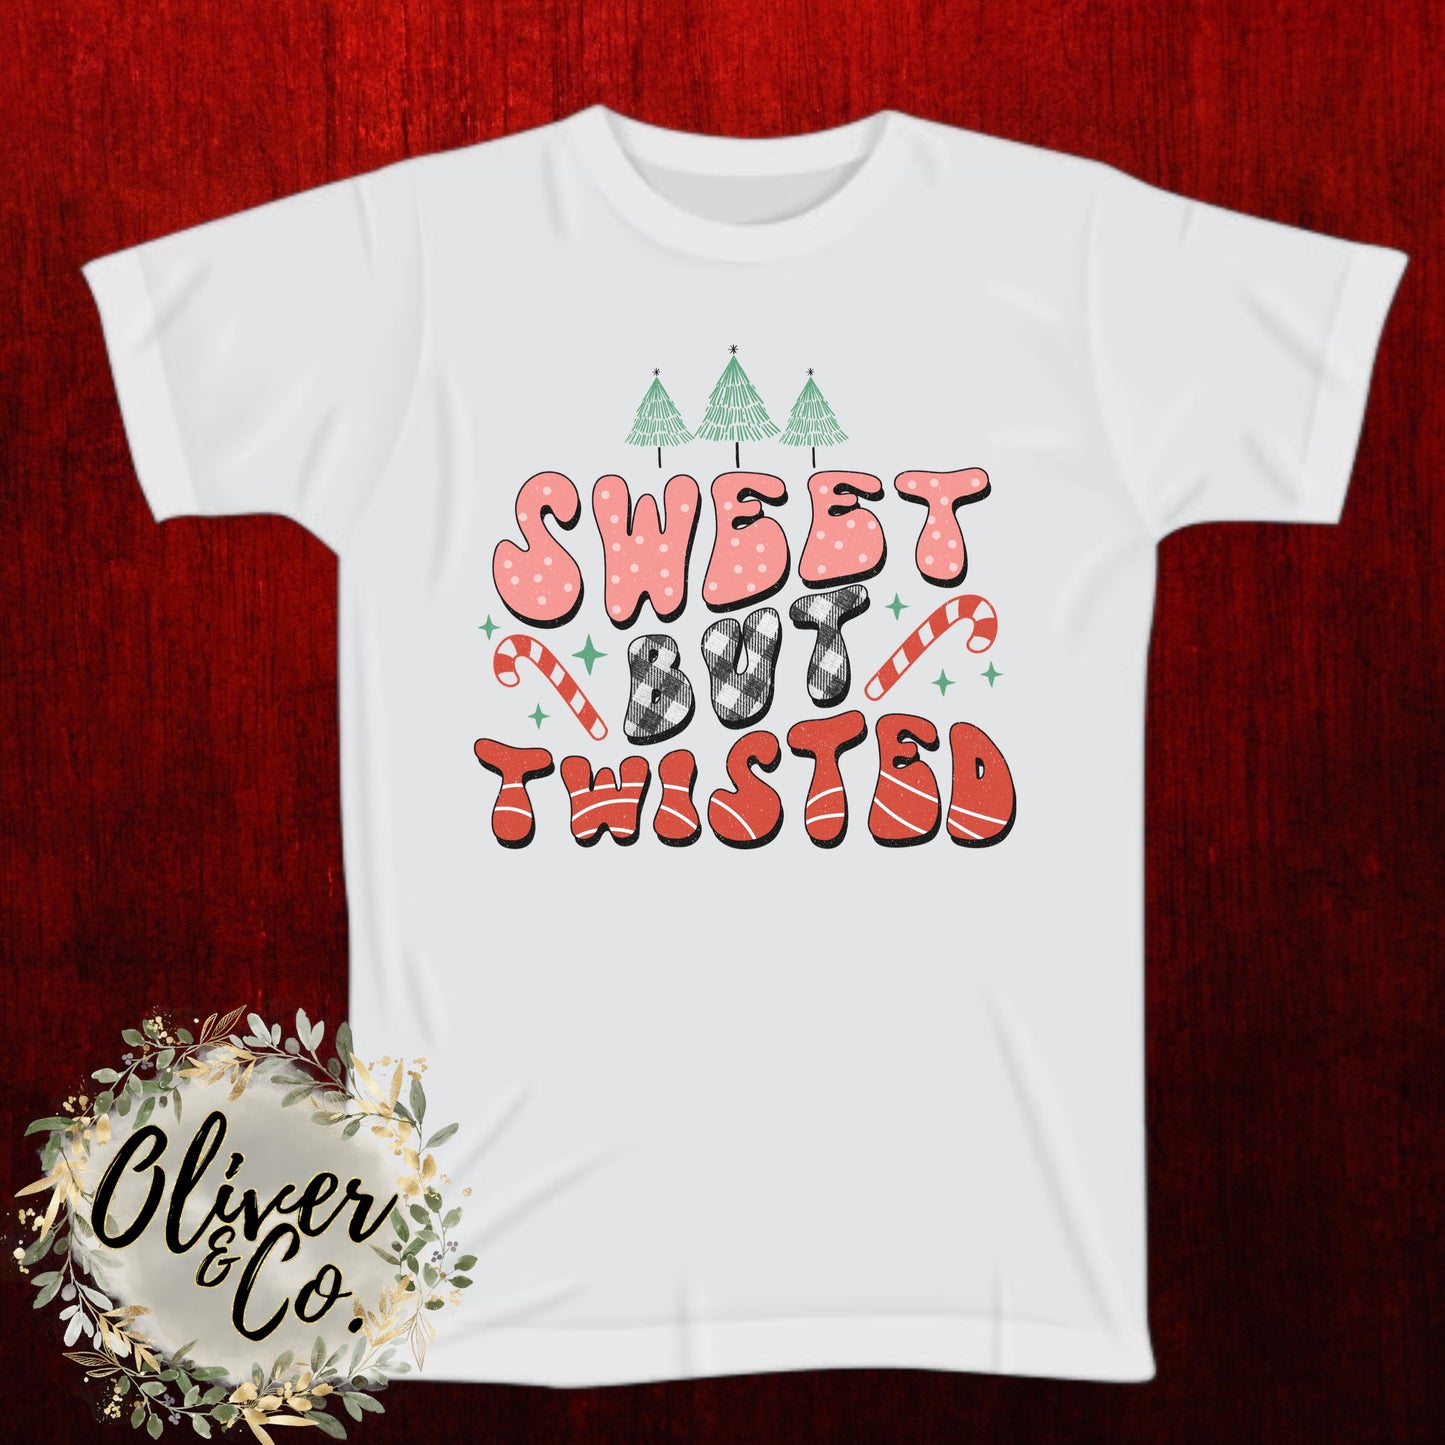 Wild About Christmas -- Sweet, but twisted . .